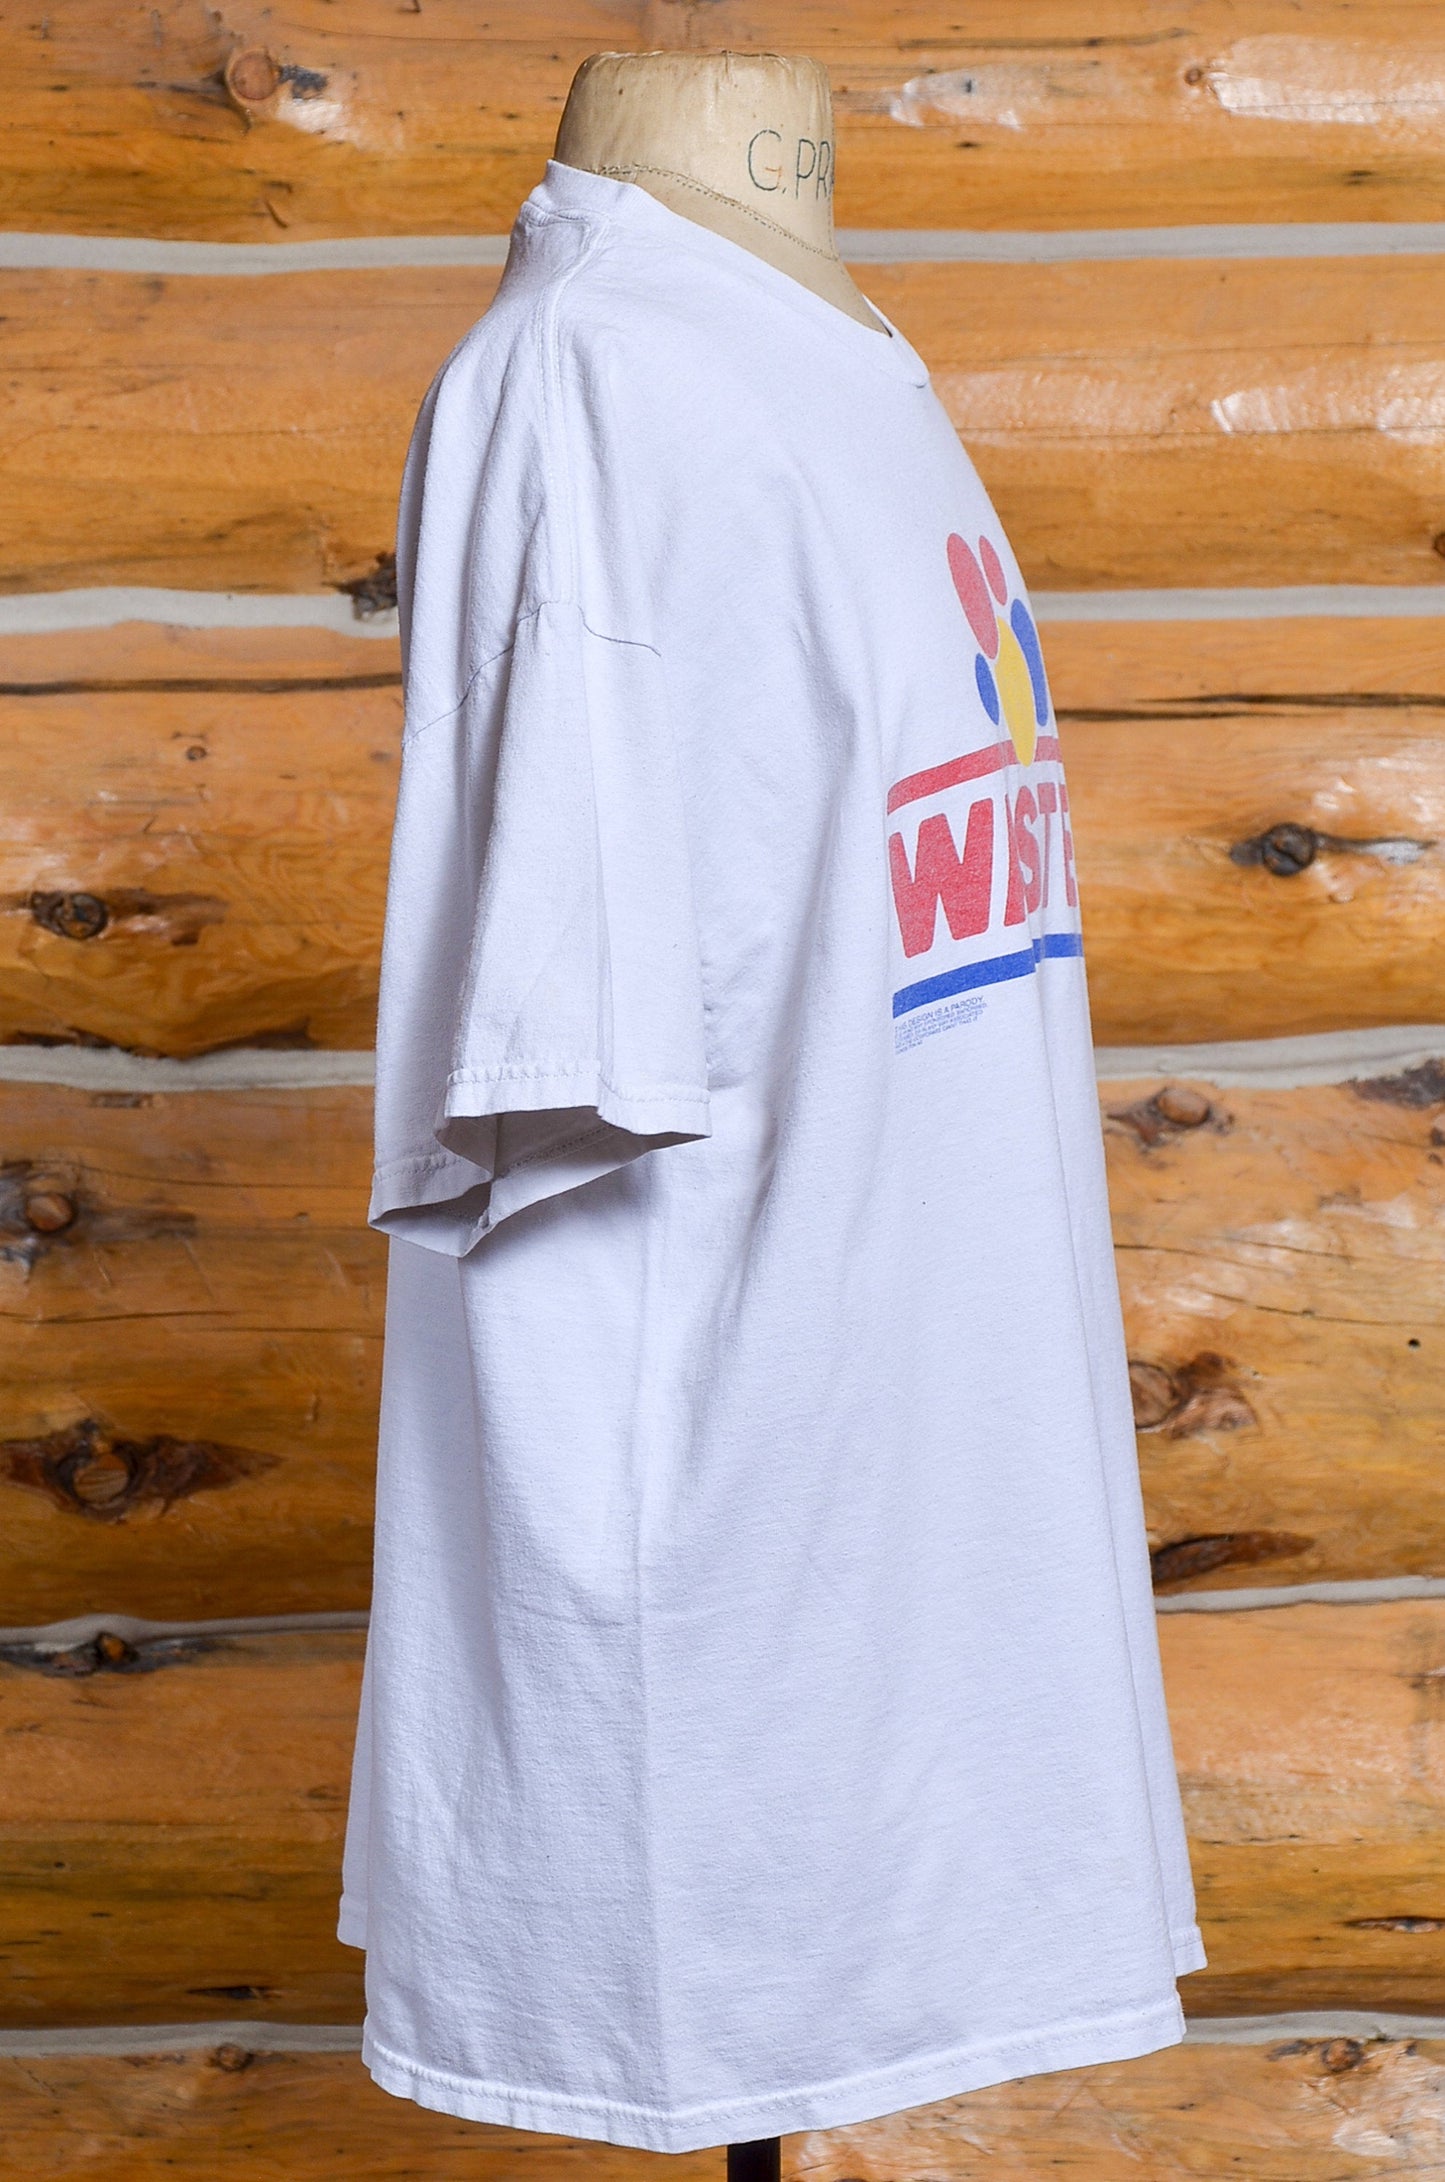 90s Wasted T Shirt Wonder Bread Parody Novelty Party Shirt